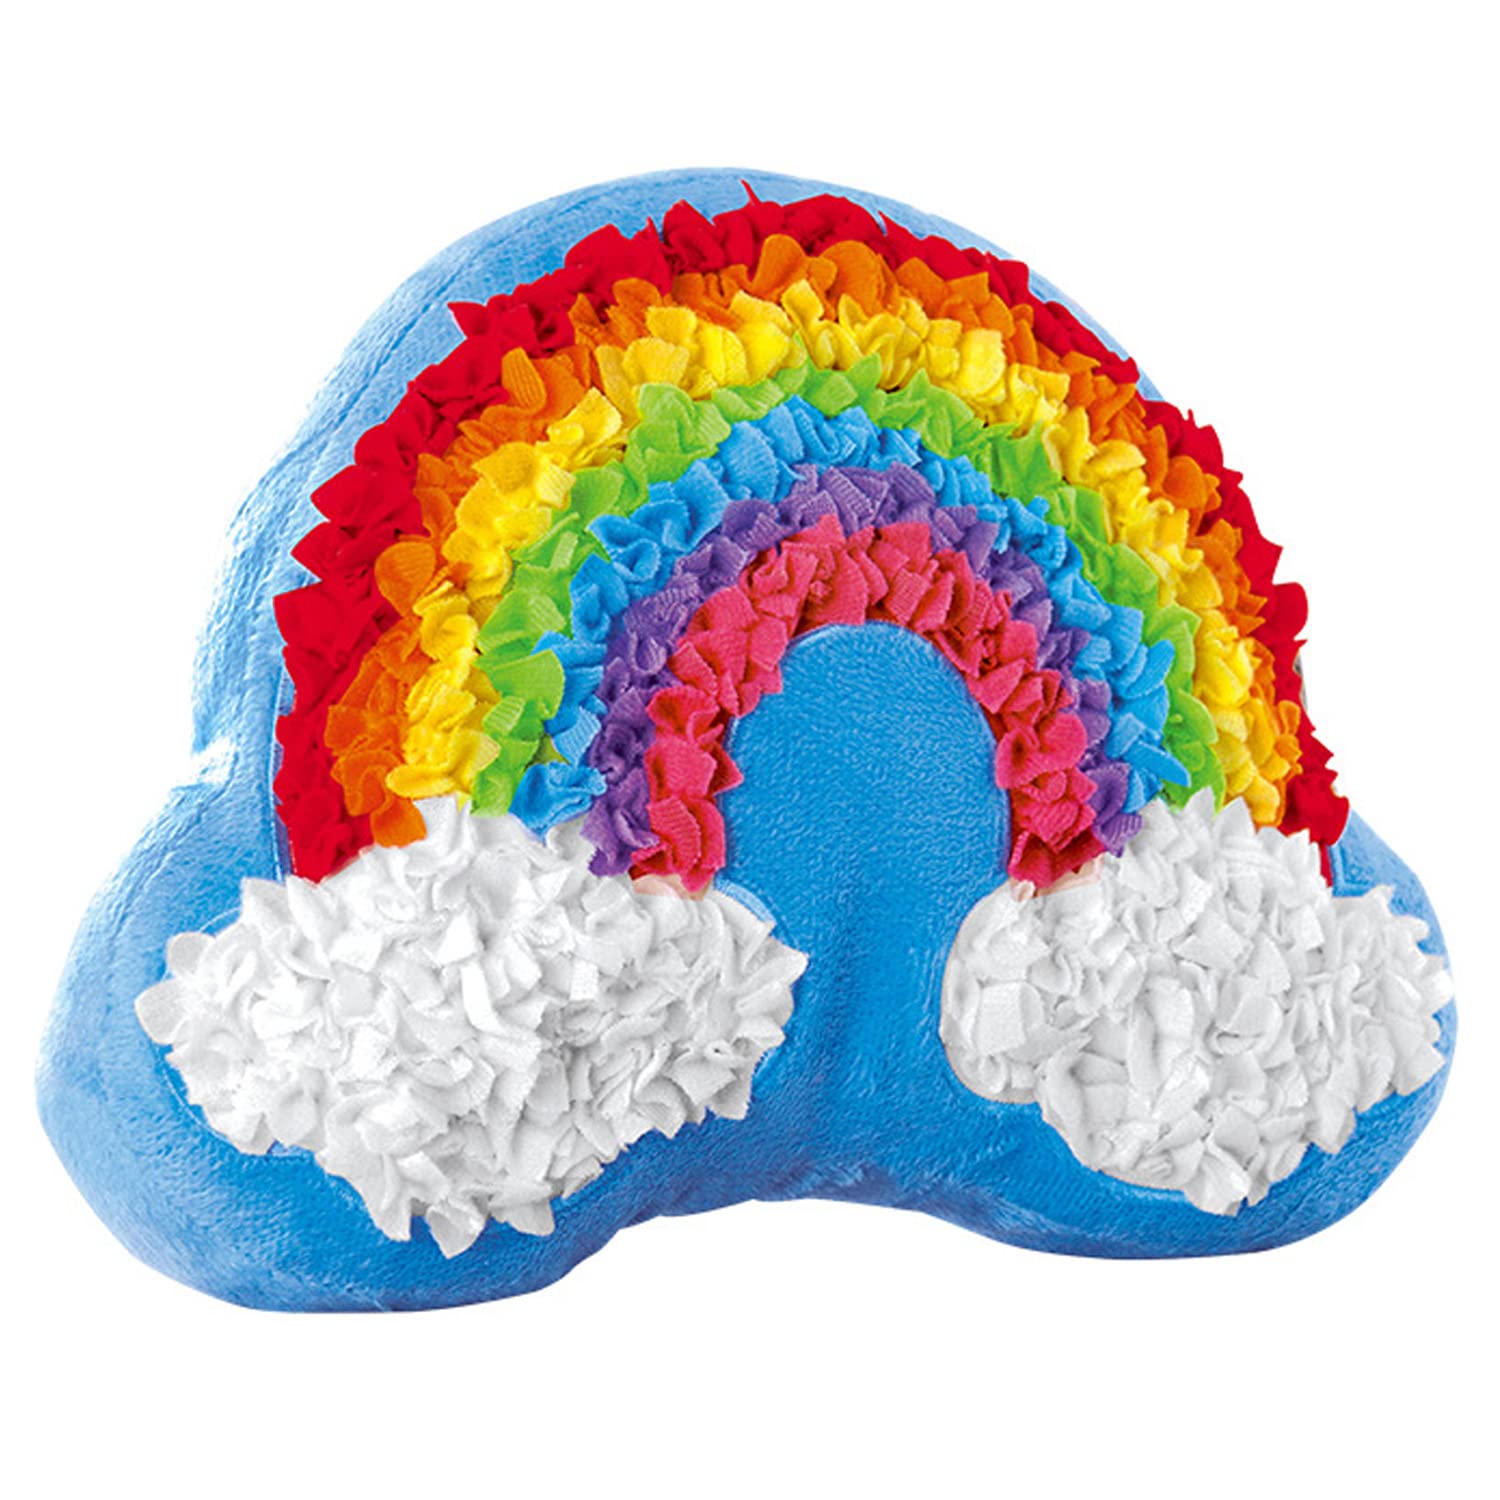 DBlosp Plush Craft Rainbow Pillow, Fabric by Number Art & Crafts, No Sewing, Making Your Own DIY Rainbow Pillow, Kids Project, Learning Fun, Ages 5+